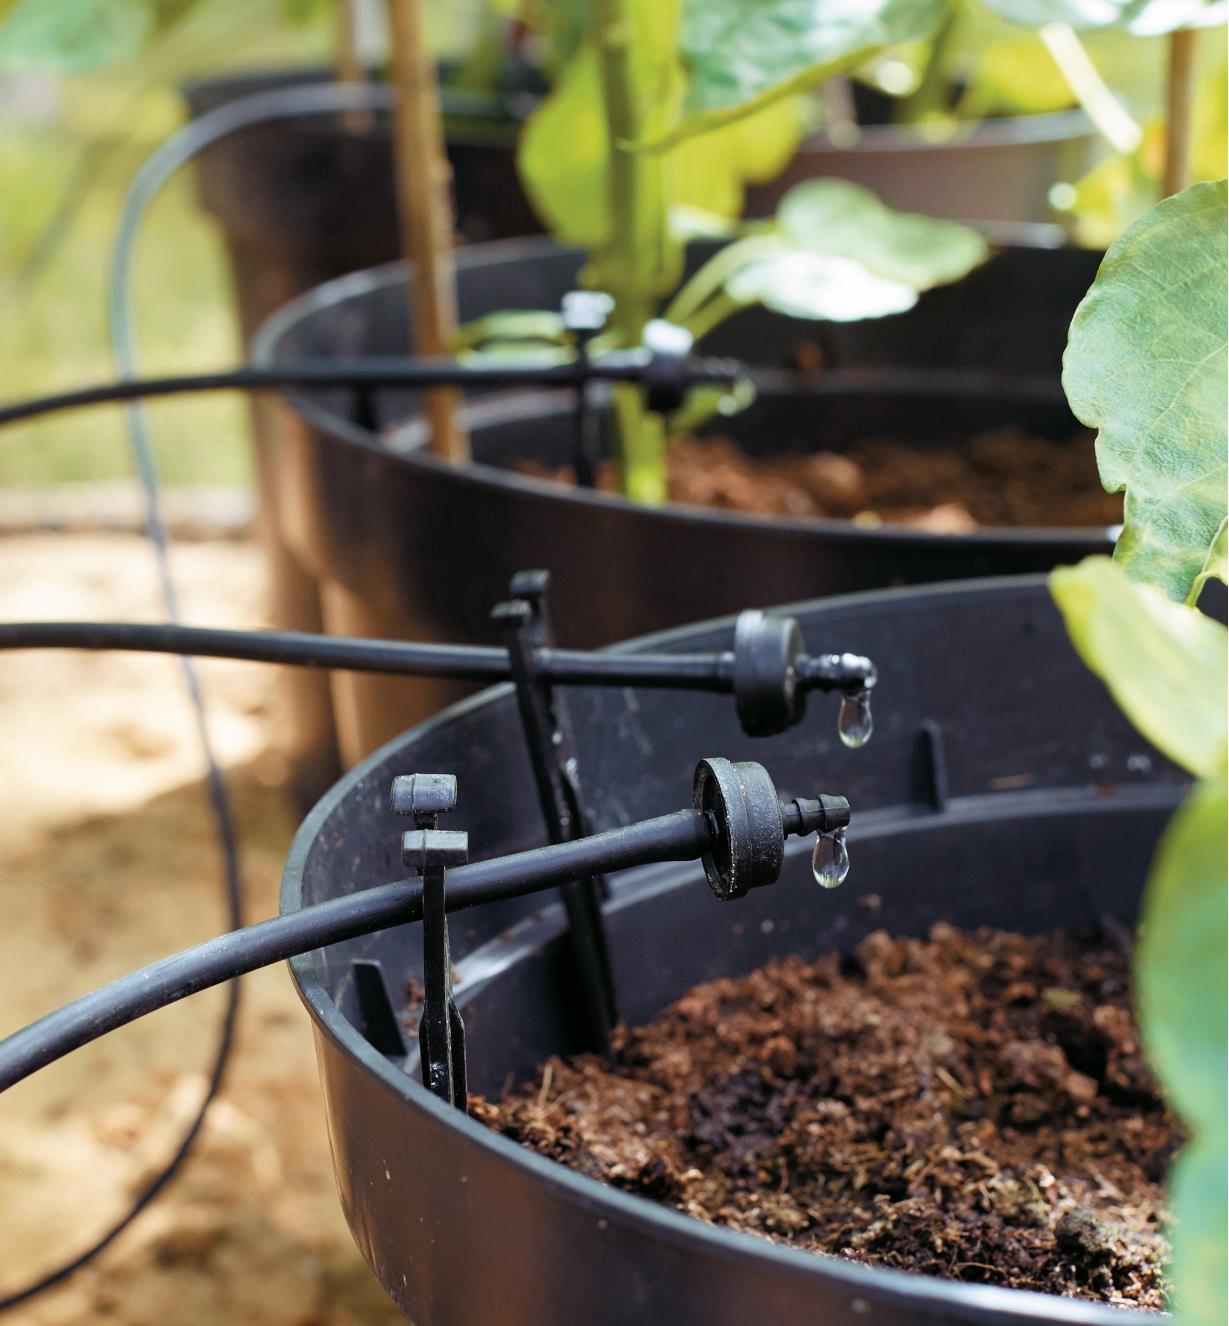 Emitters staked in pots dripping water into the soil